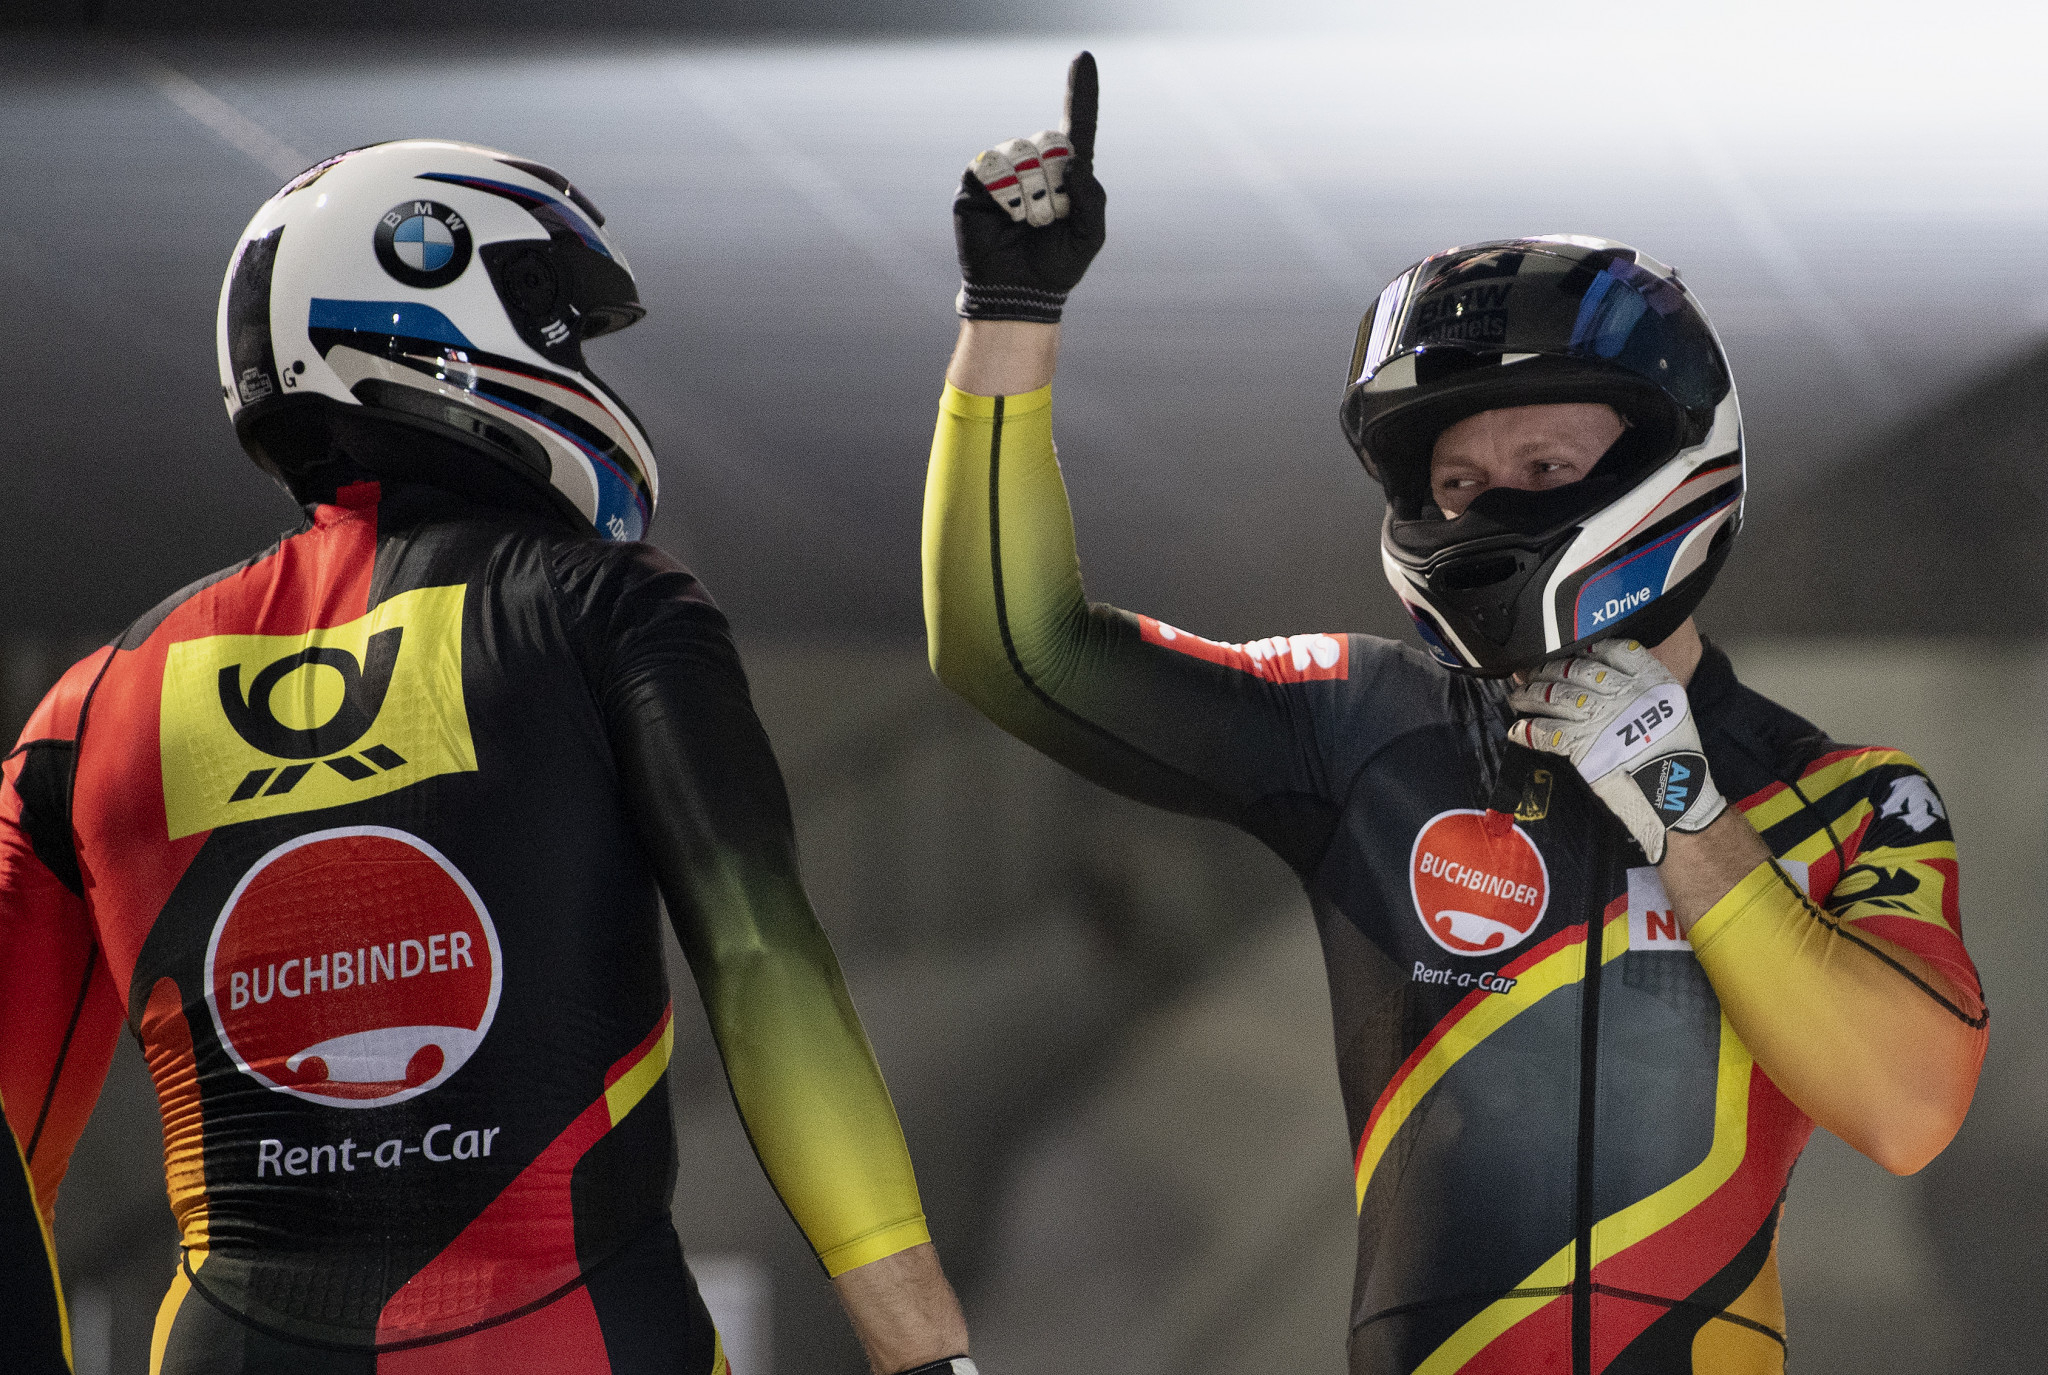 Luge World Championships move from Canada to Germany